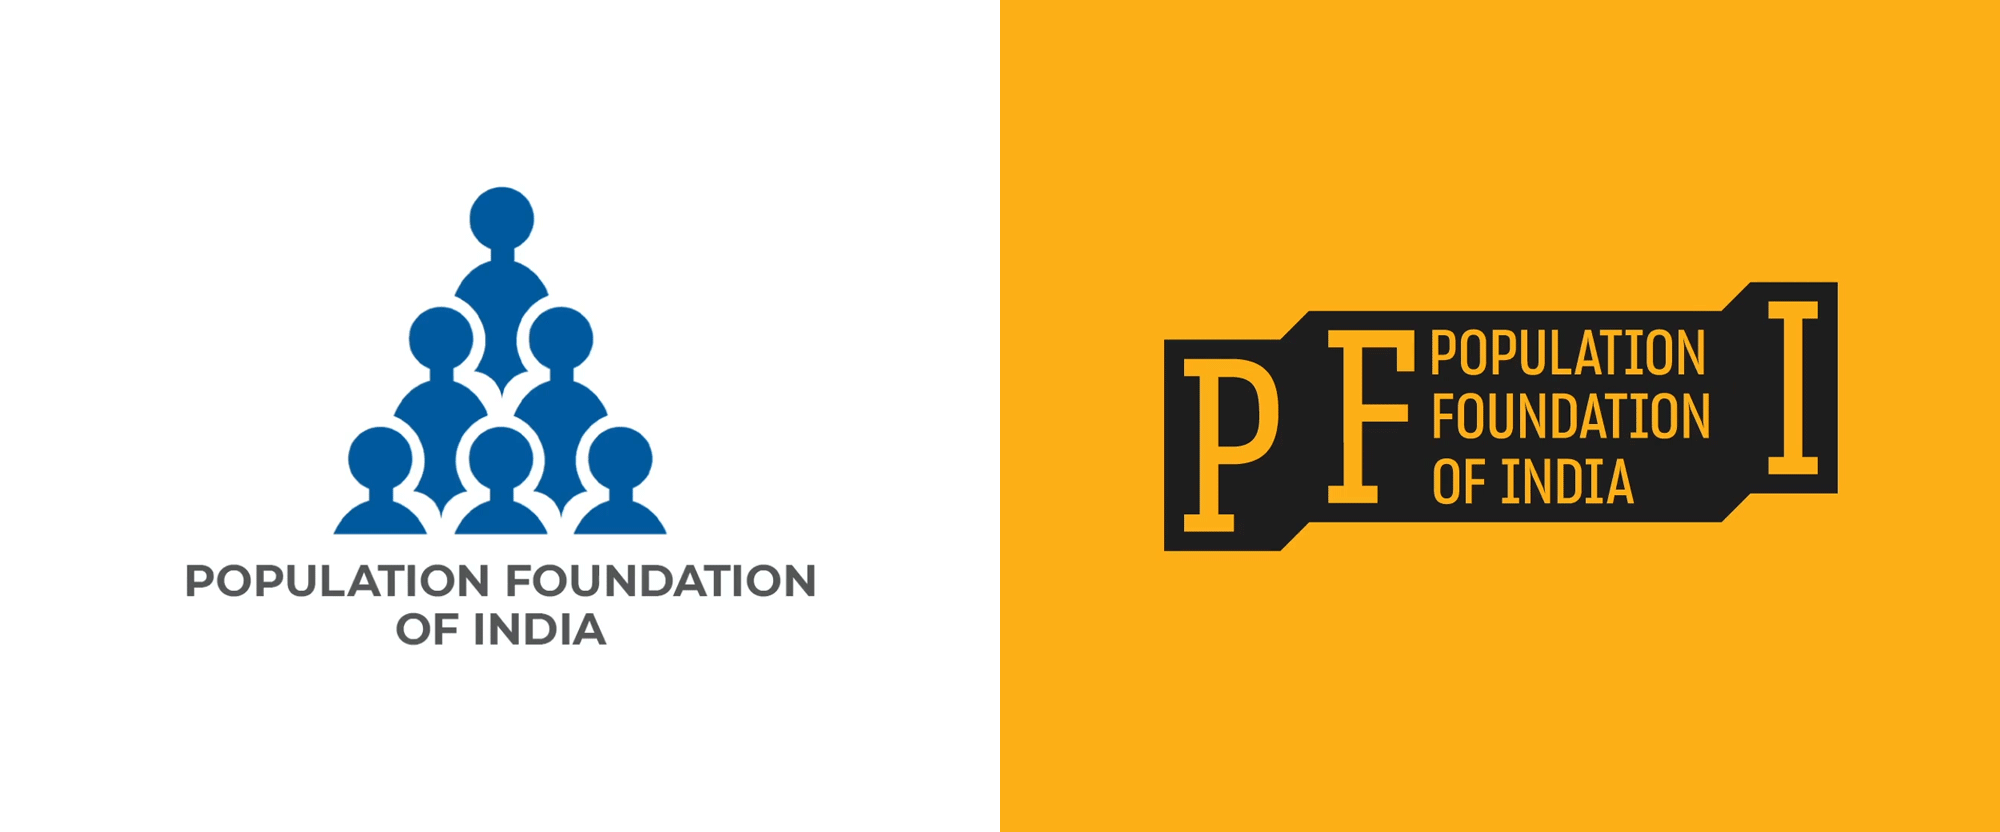 New Logo and Identity for Population Foundation of India by Lopez Design